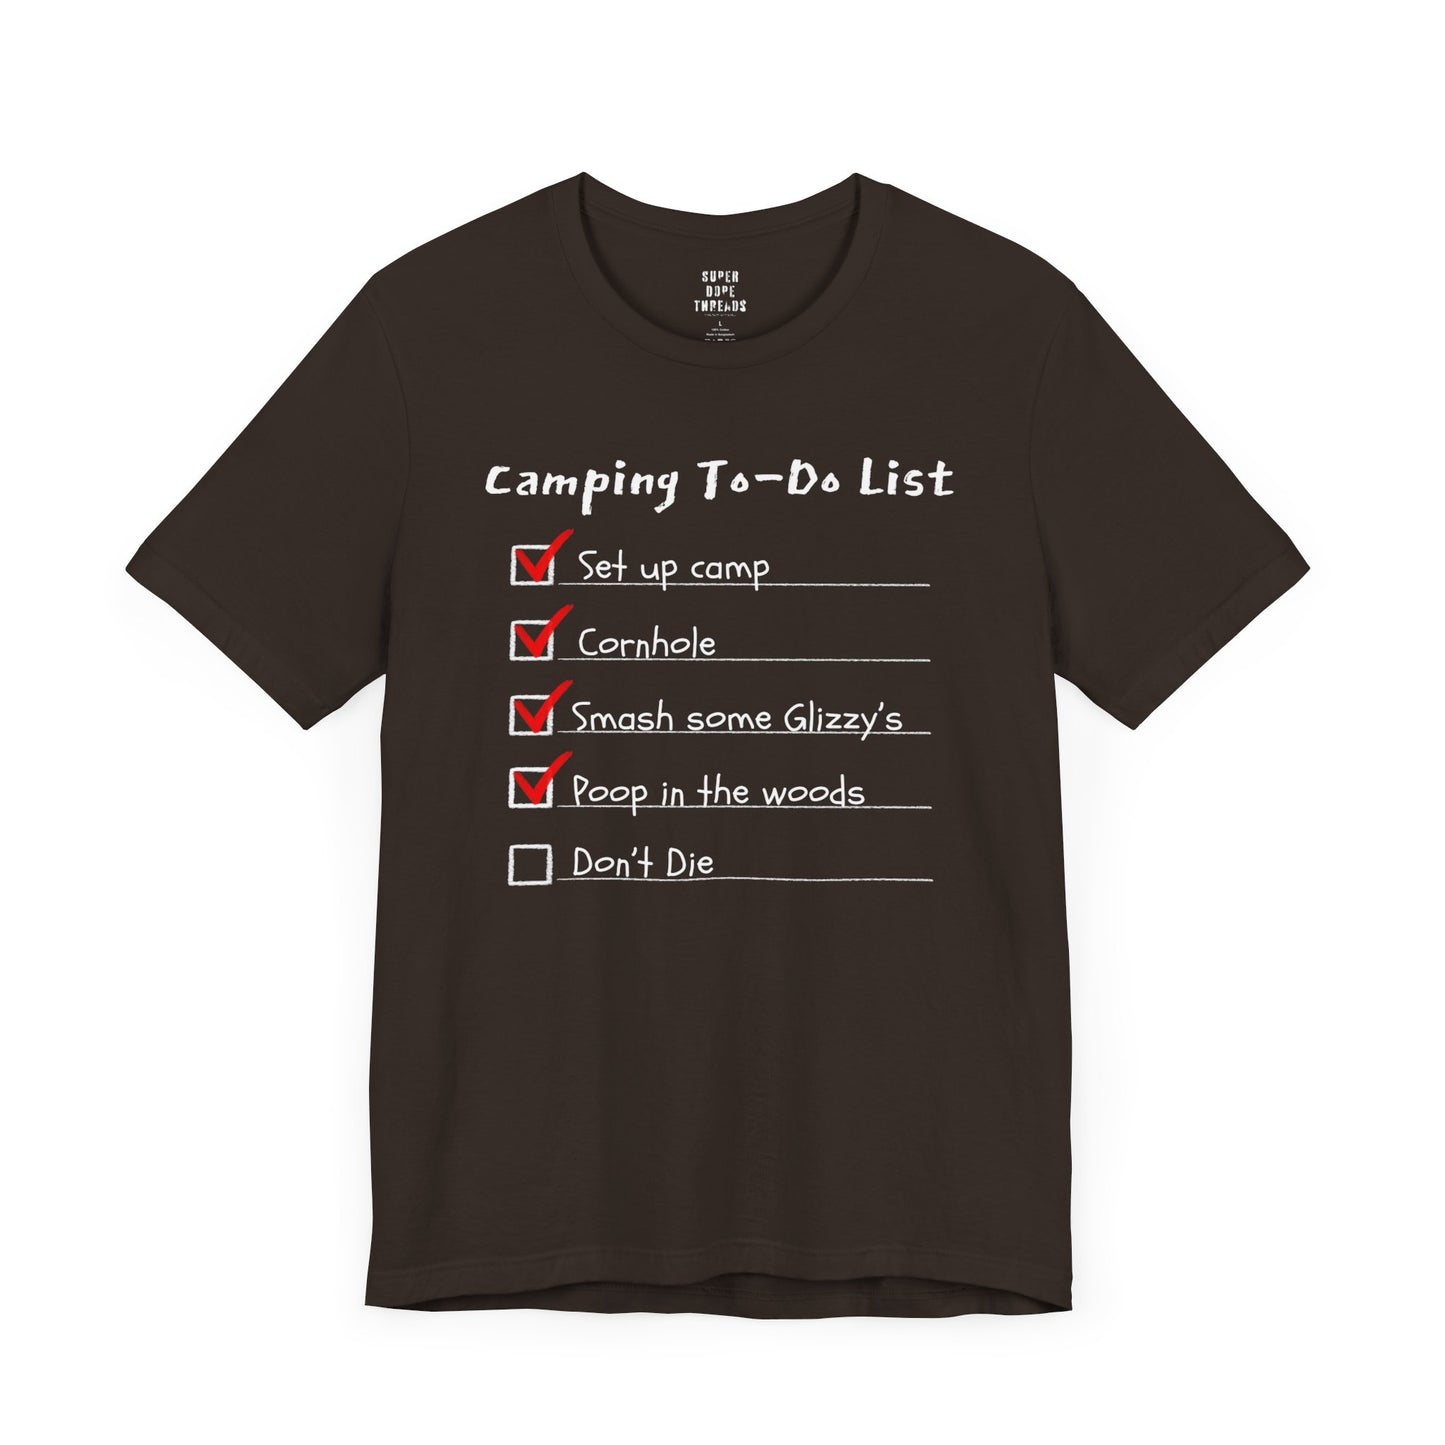 Super Dope Threads - Camping To-Do List